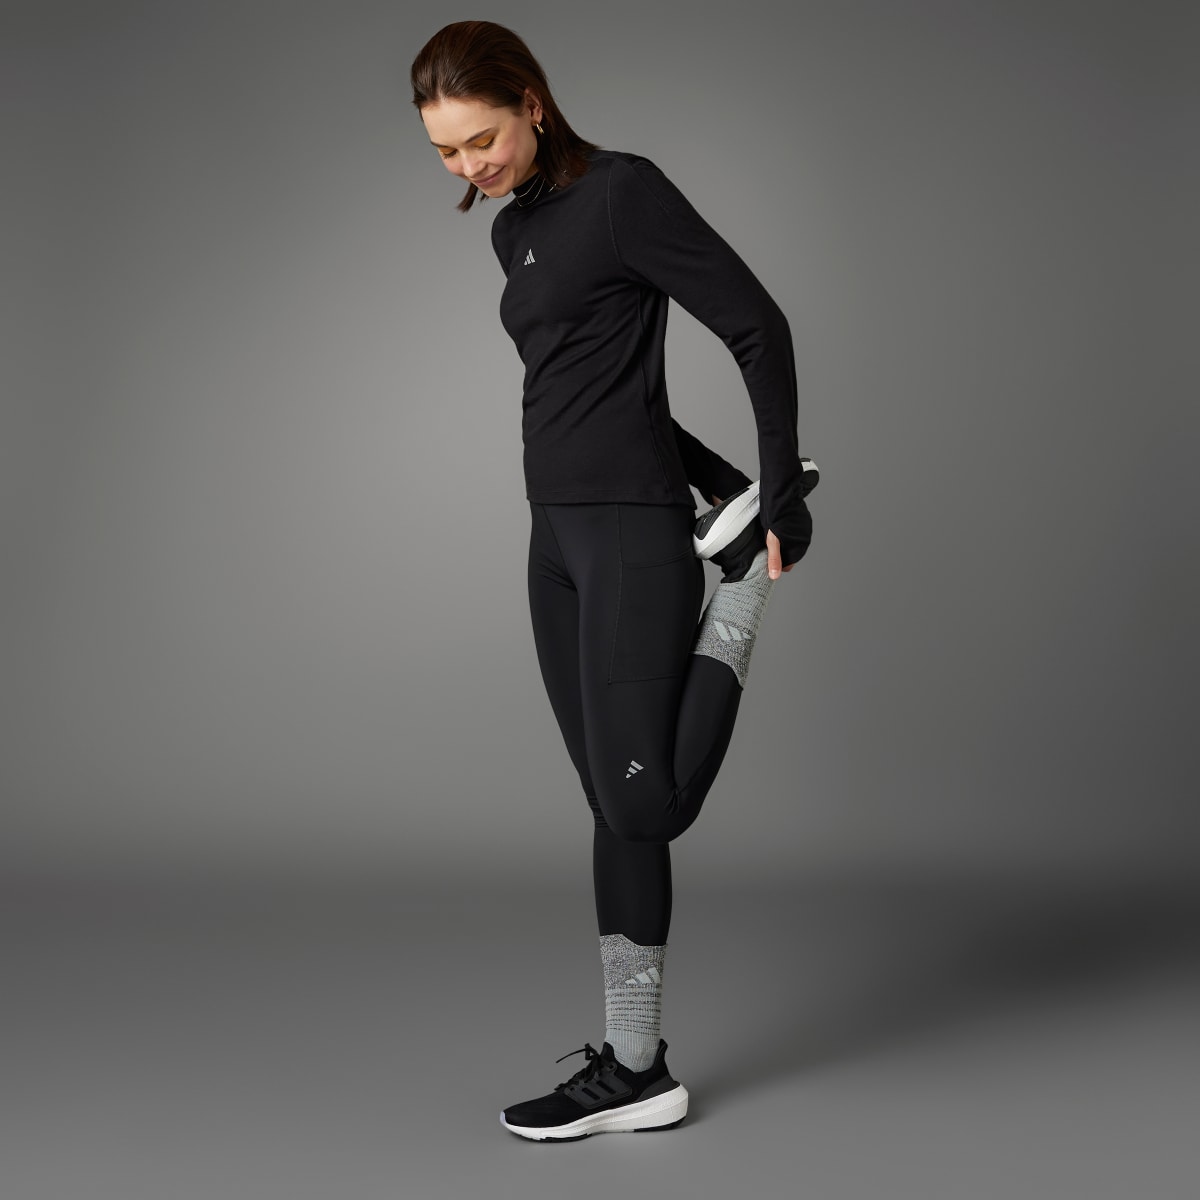 Adidas Ultimate Running Conquer the Elements Merino Long Sleeve Shirt. 6